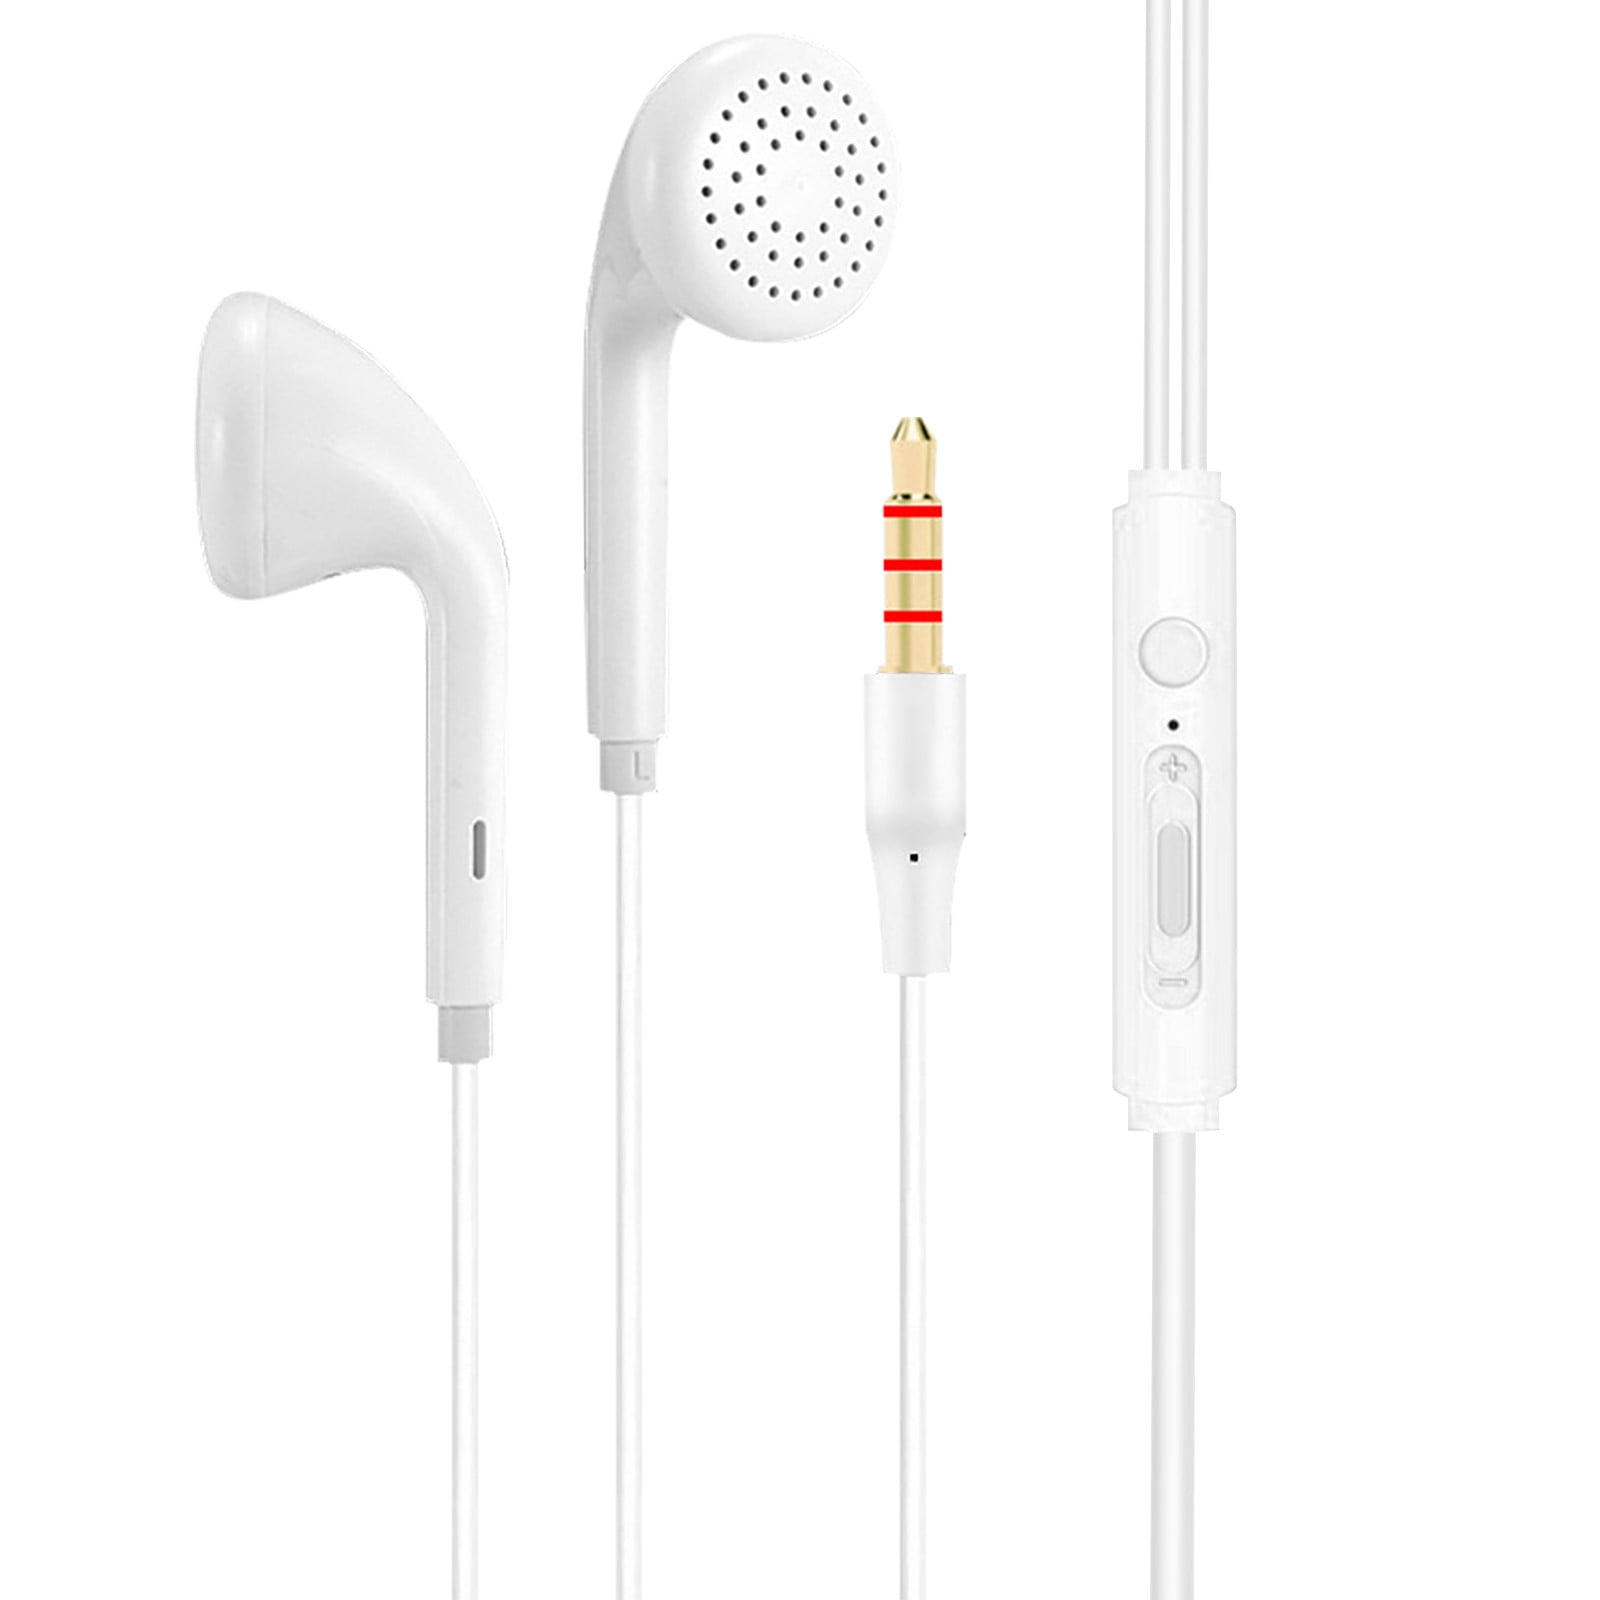 Wireless Headphones, HD Stereo, 10HRS Play WHITE